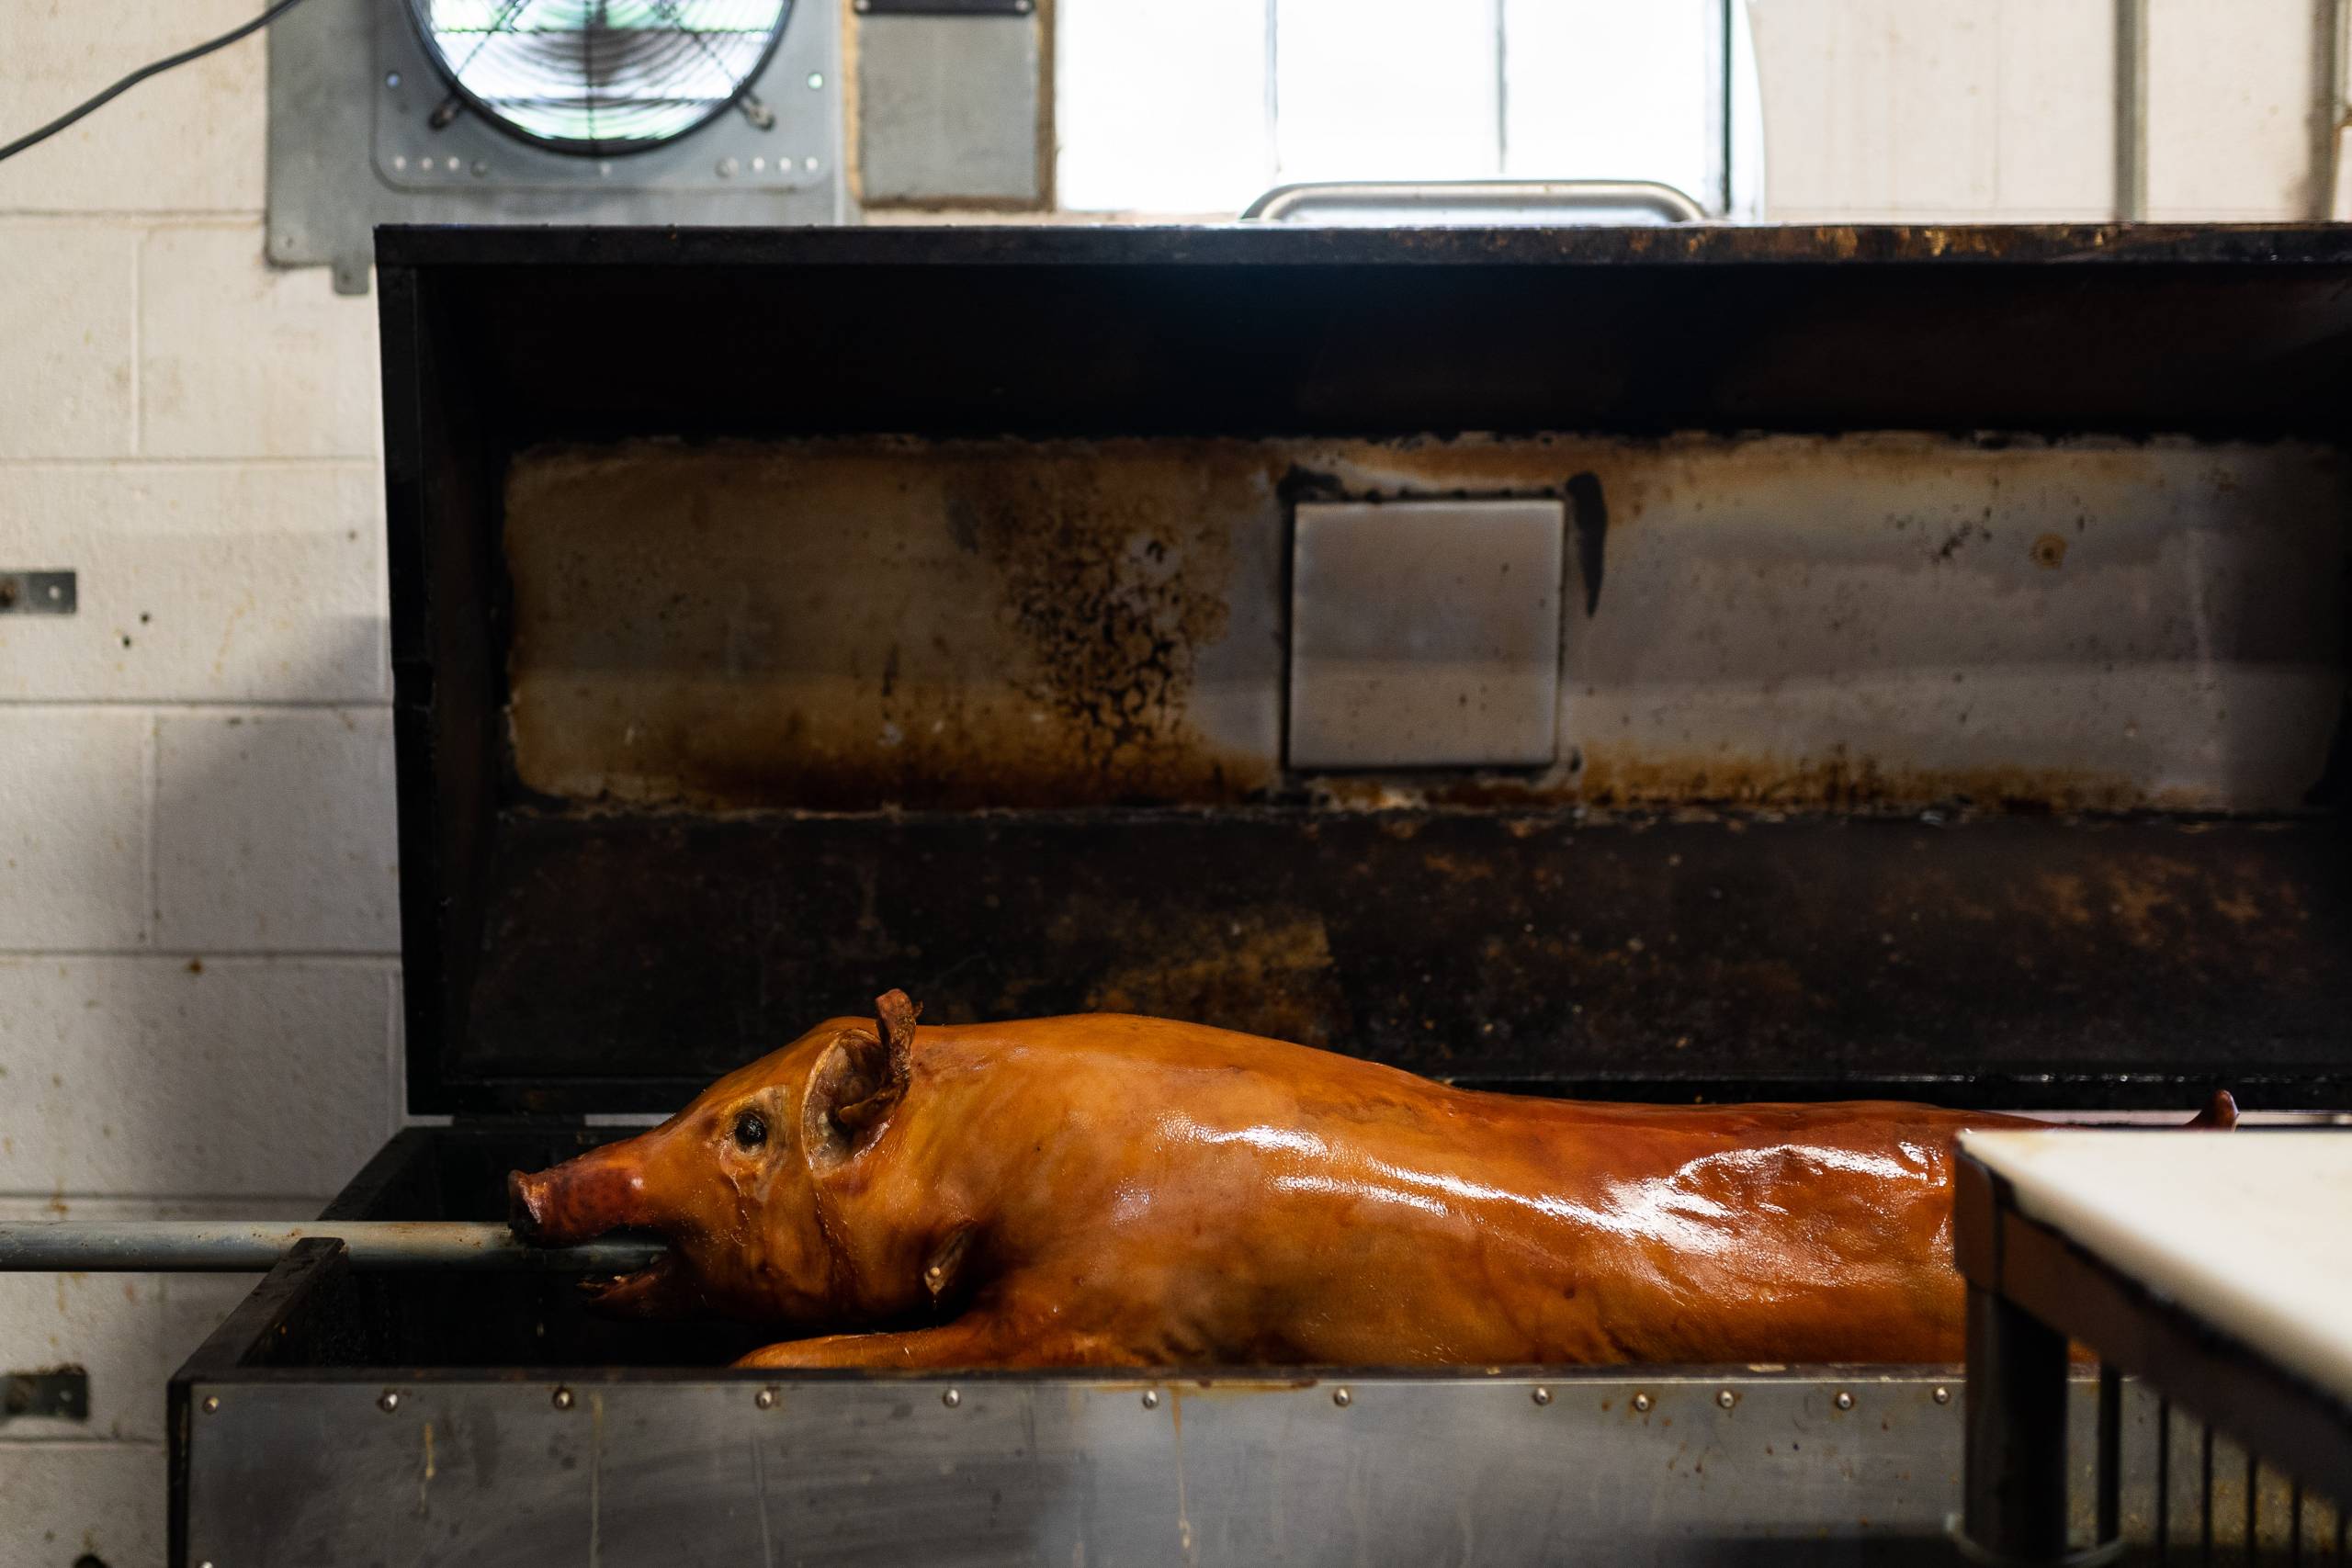 A whole roast pig, its skin golden-brown, still mounted on a spit-roaster.